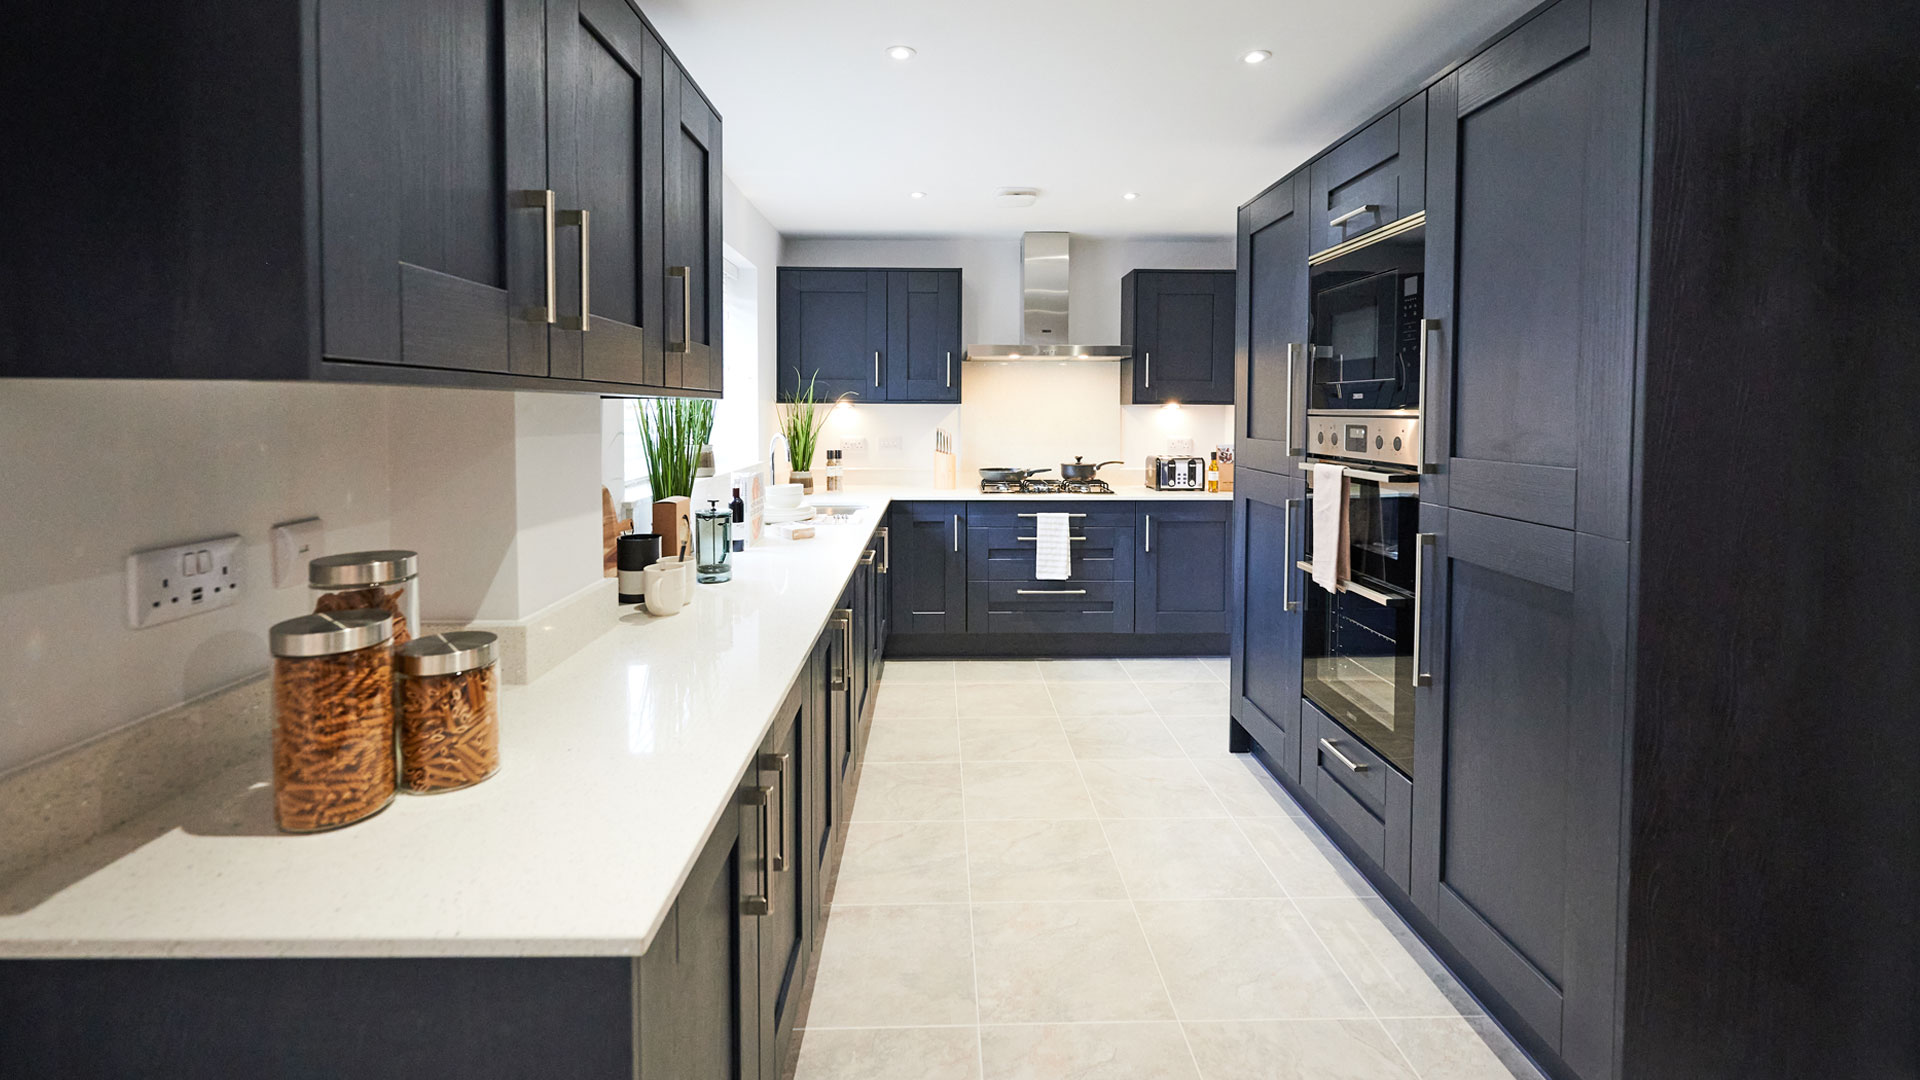 Kendrick Homes - new homes in the West Midlands, Cheltenham and Gloucester